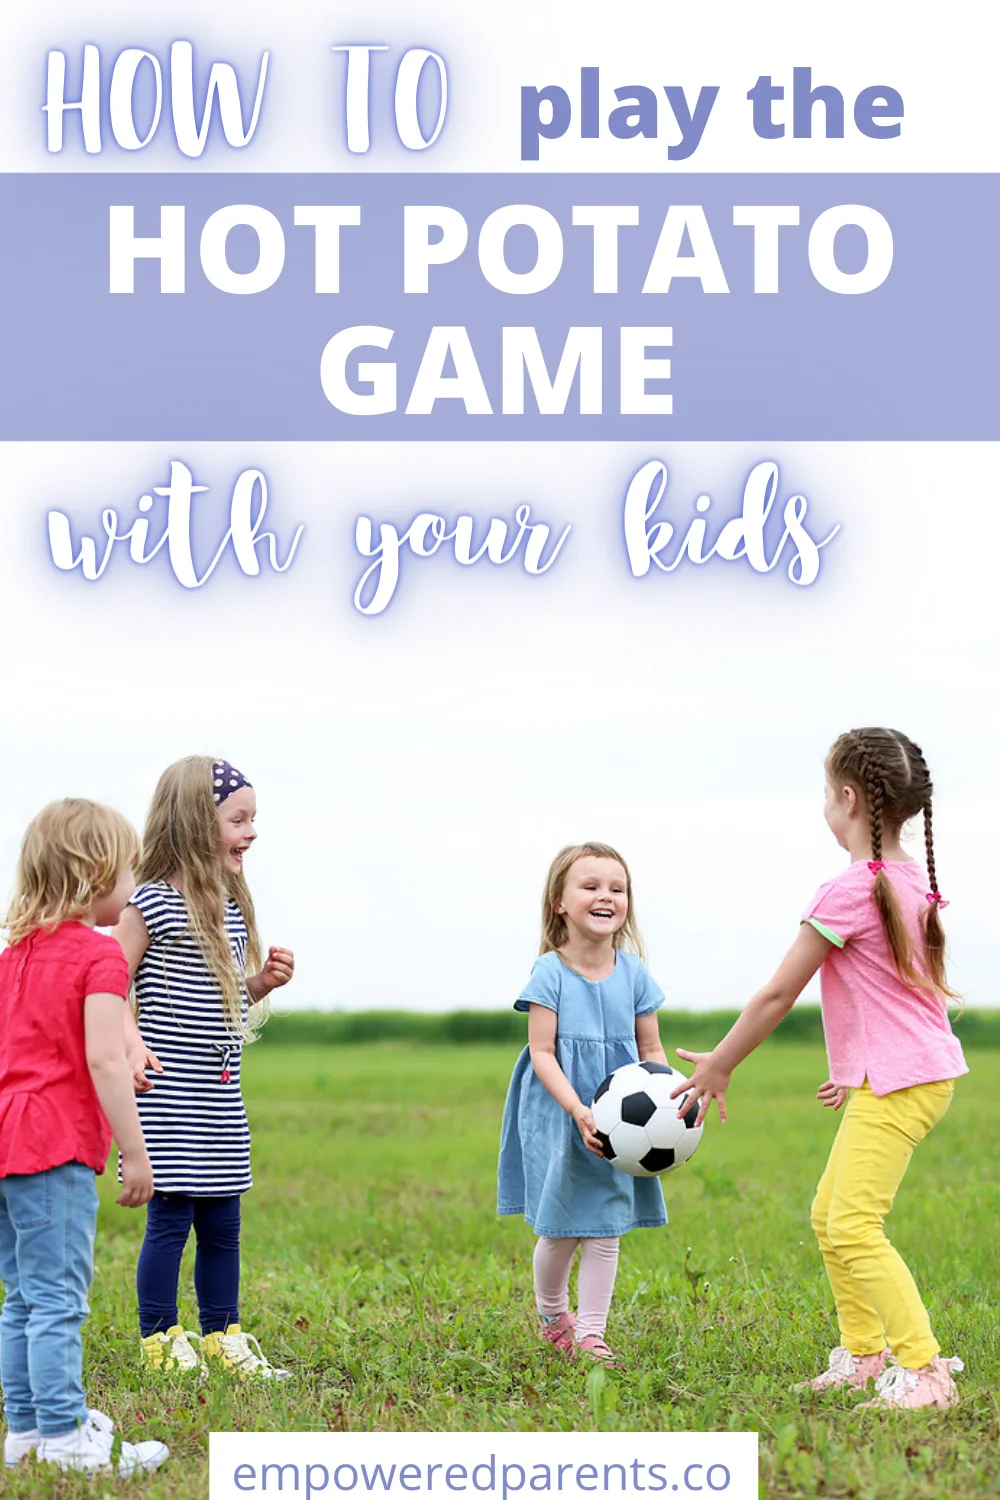 Children playing a ball game. Text reads "How to play the hot potato game with your kids".